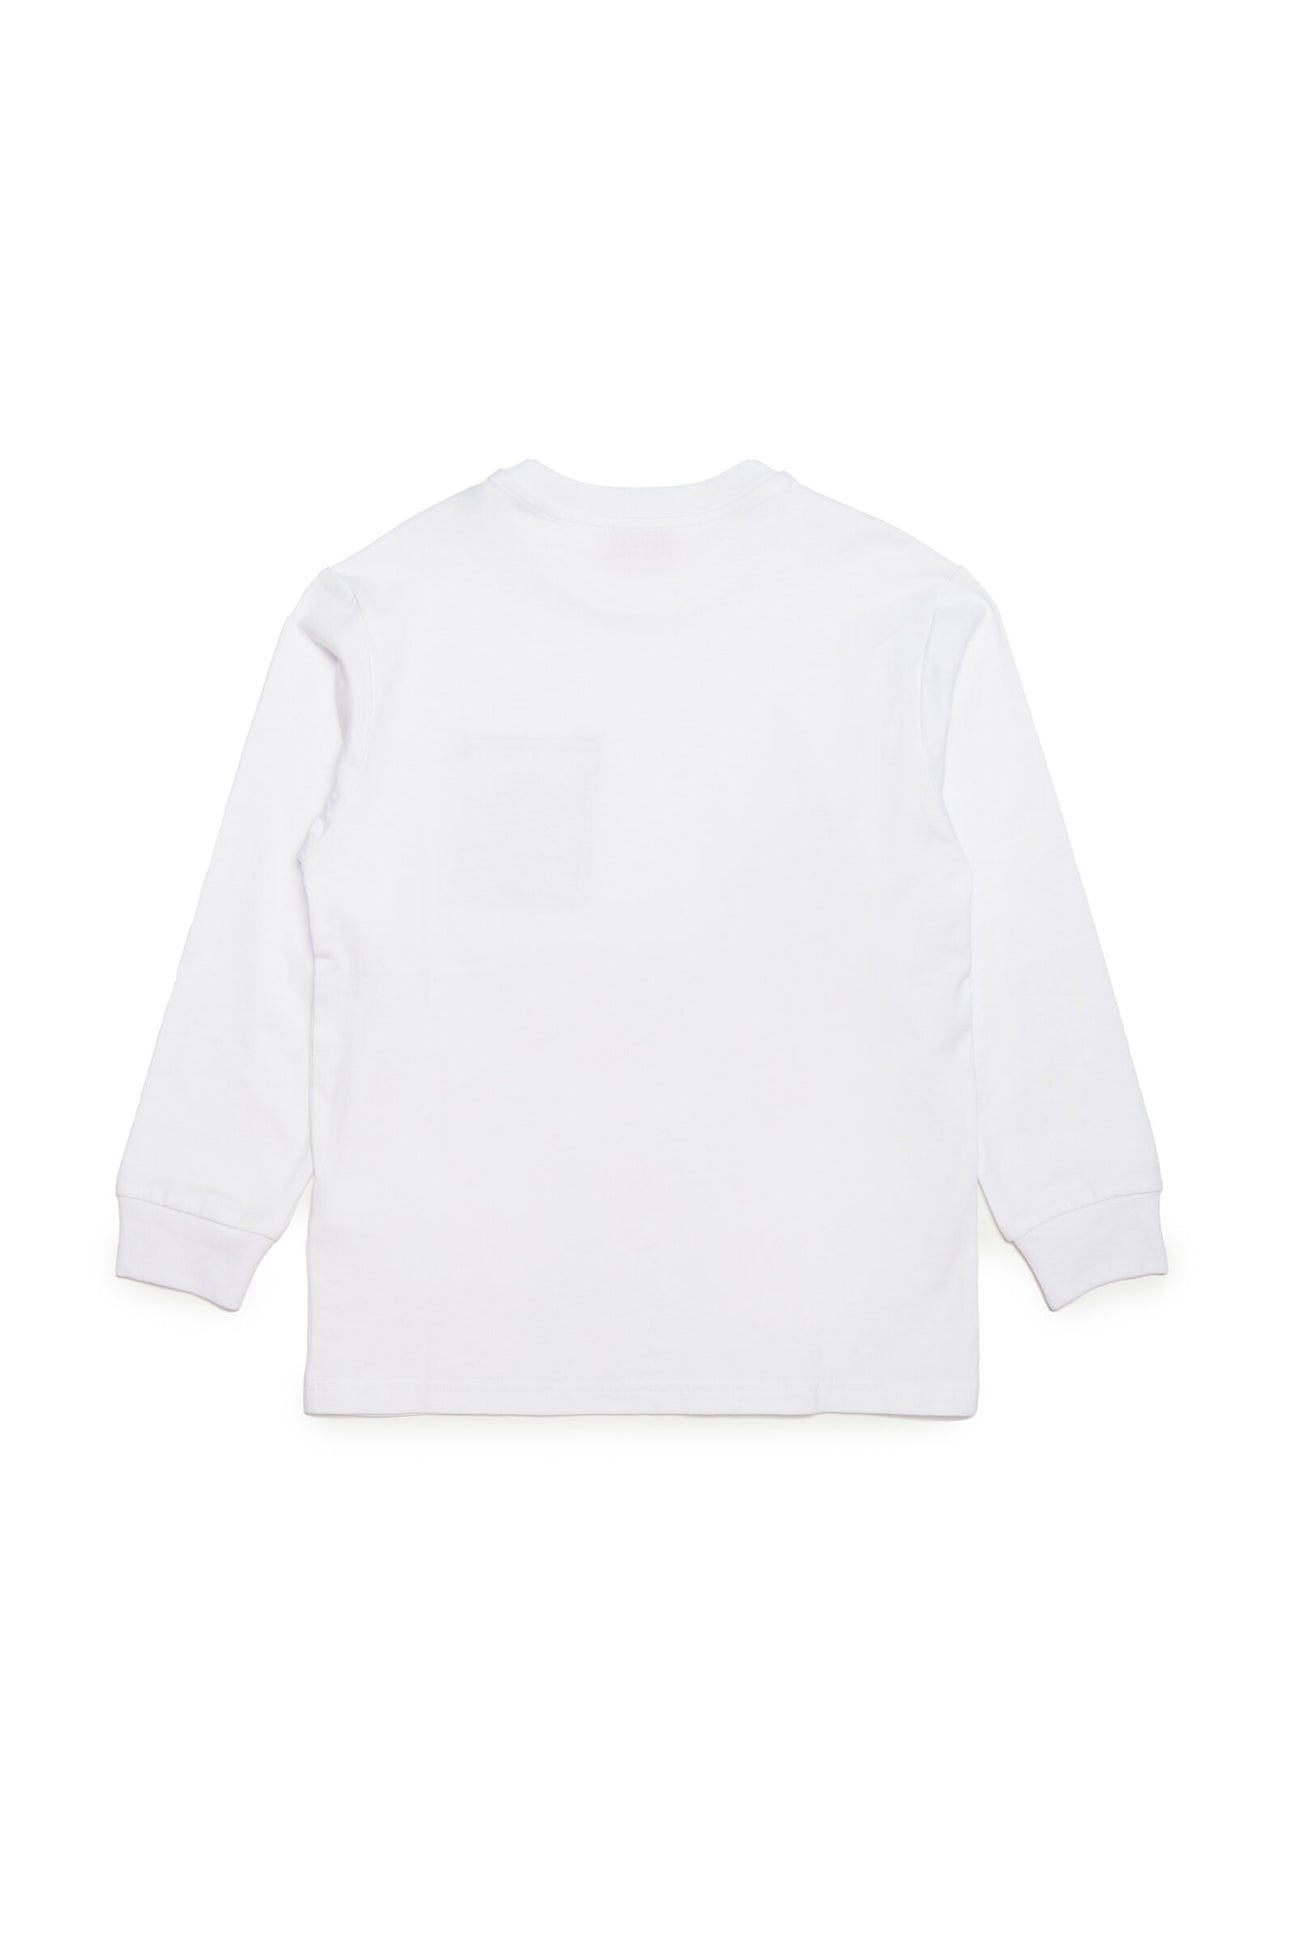 Crew-neck jersey T-shirt with pocket Outdoor Crew-neck jersey T-shirt with pocket Outdoor